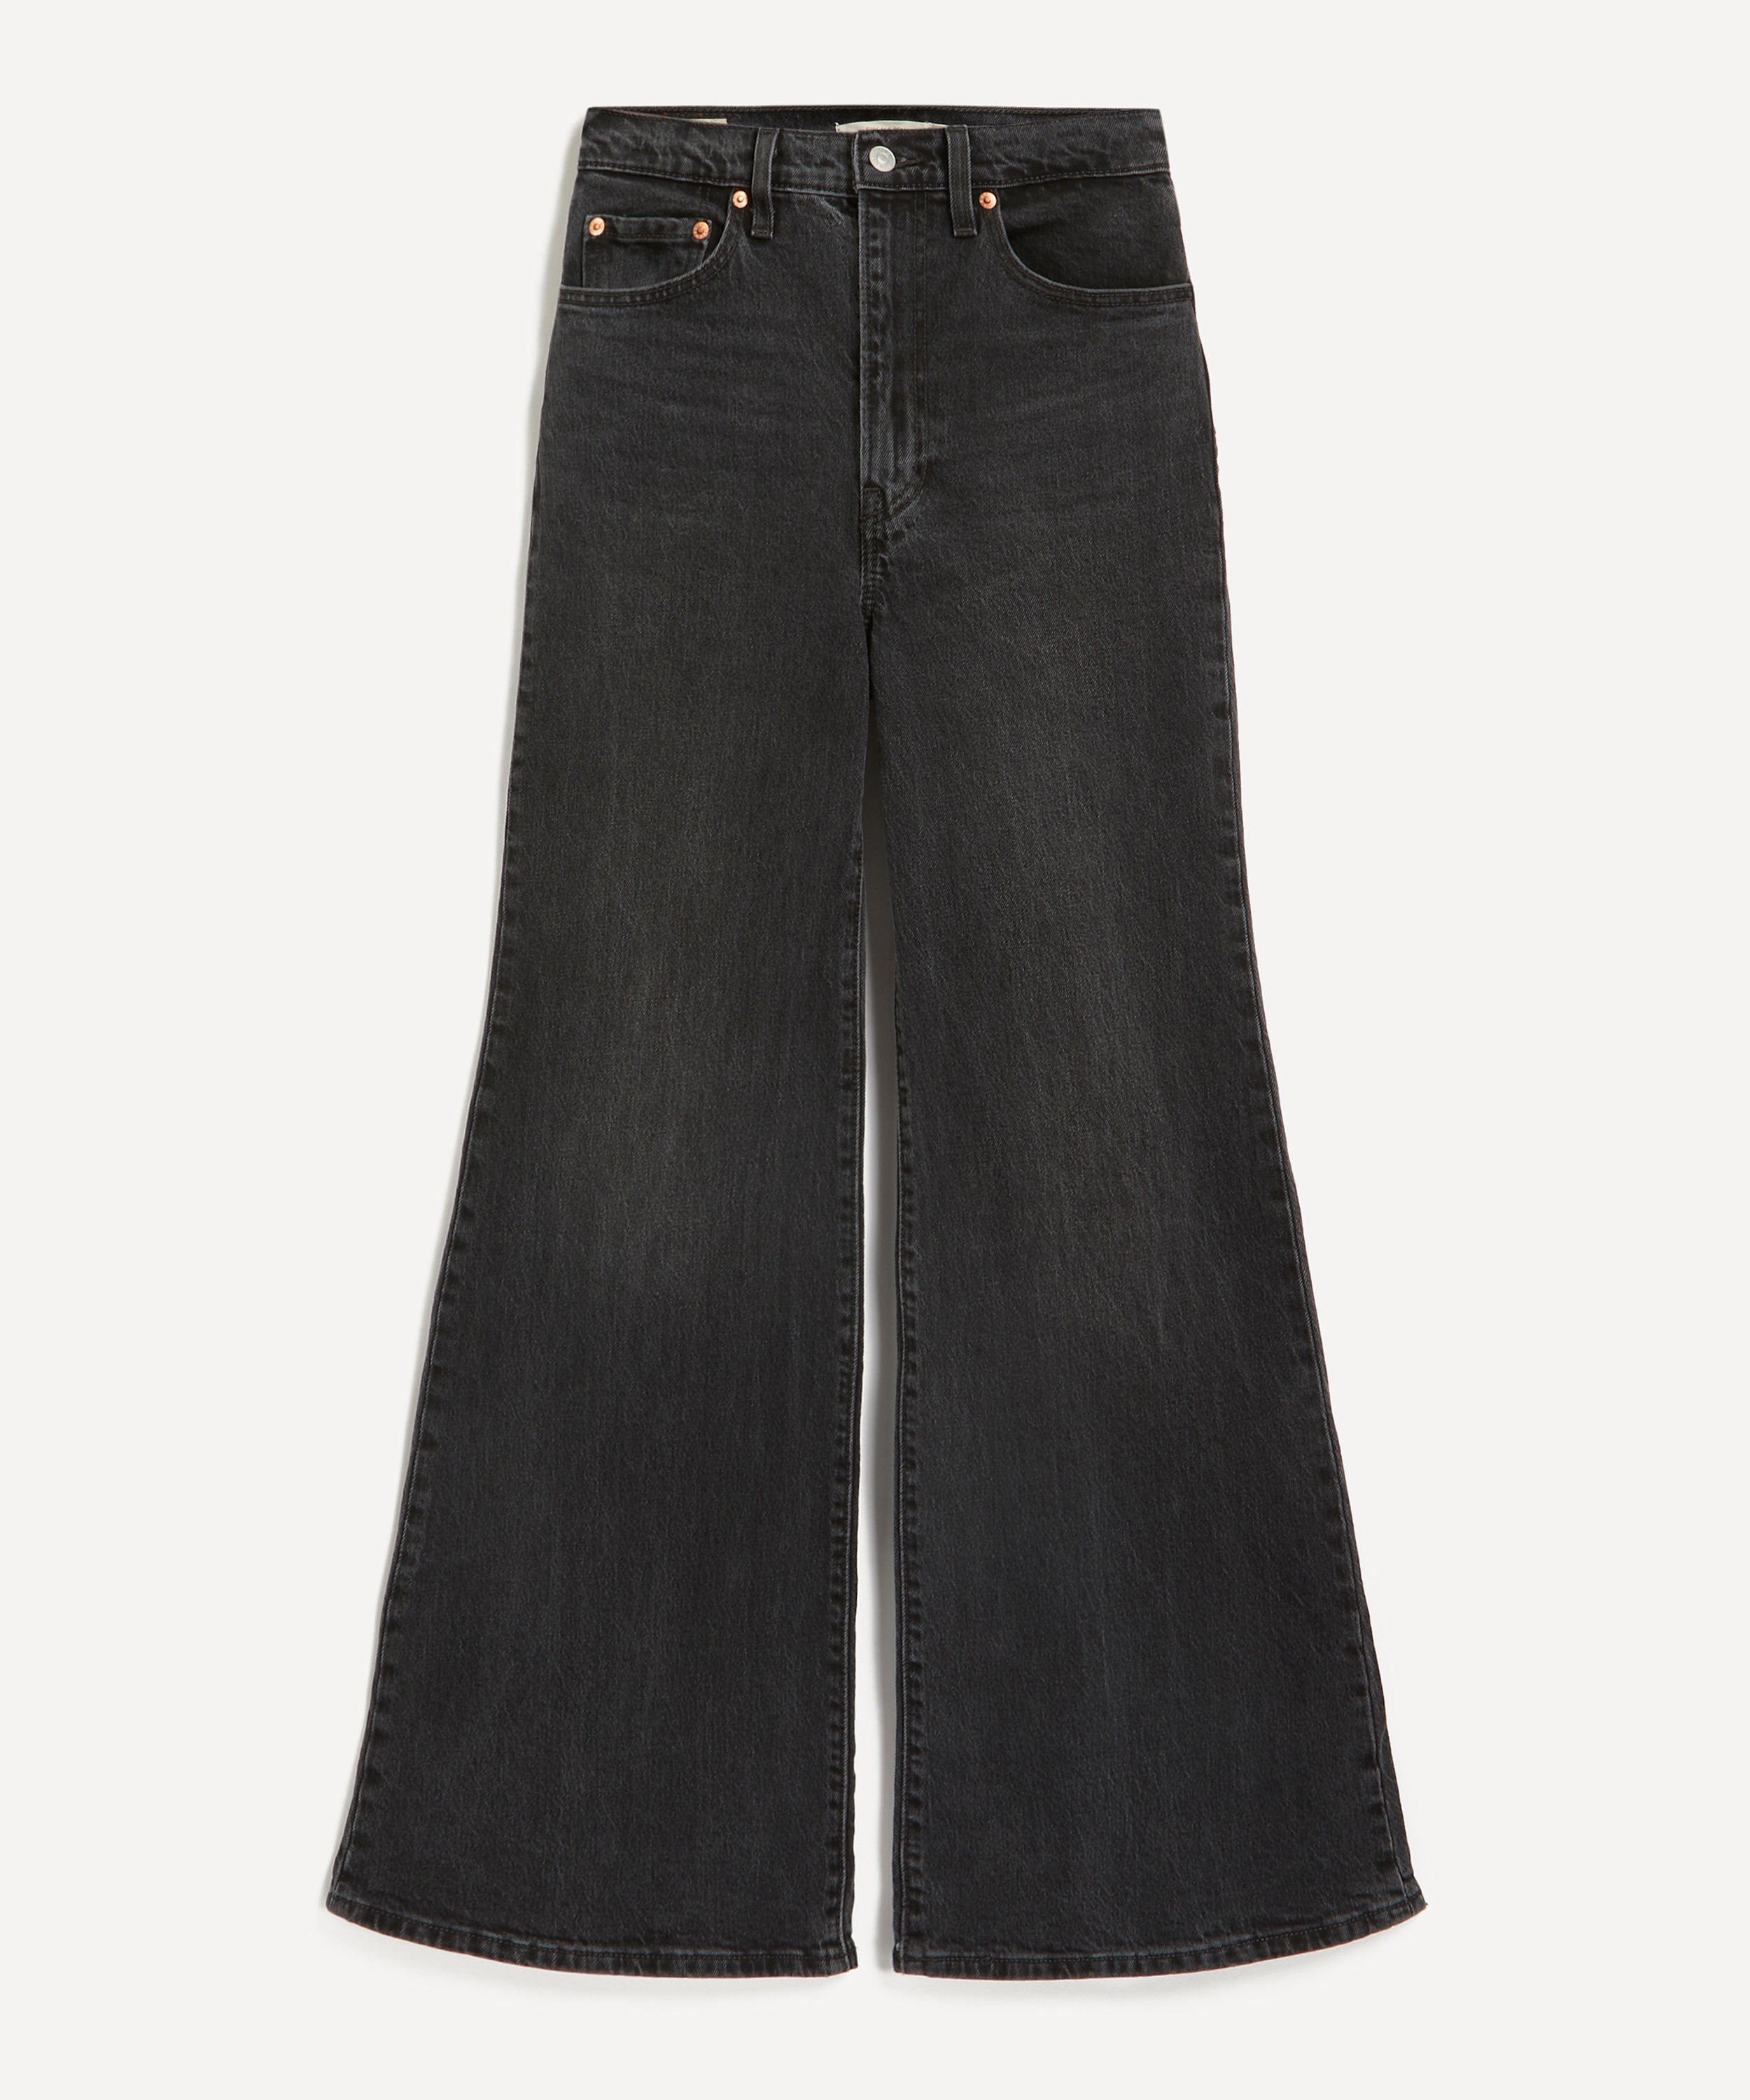 Levi's Red Tab Ribcage Bell High-Waisted Flared Jeans in On the